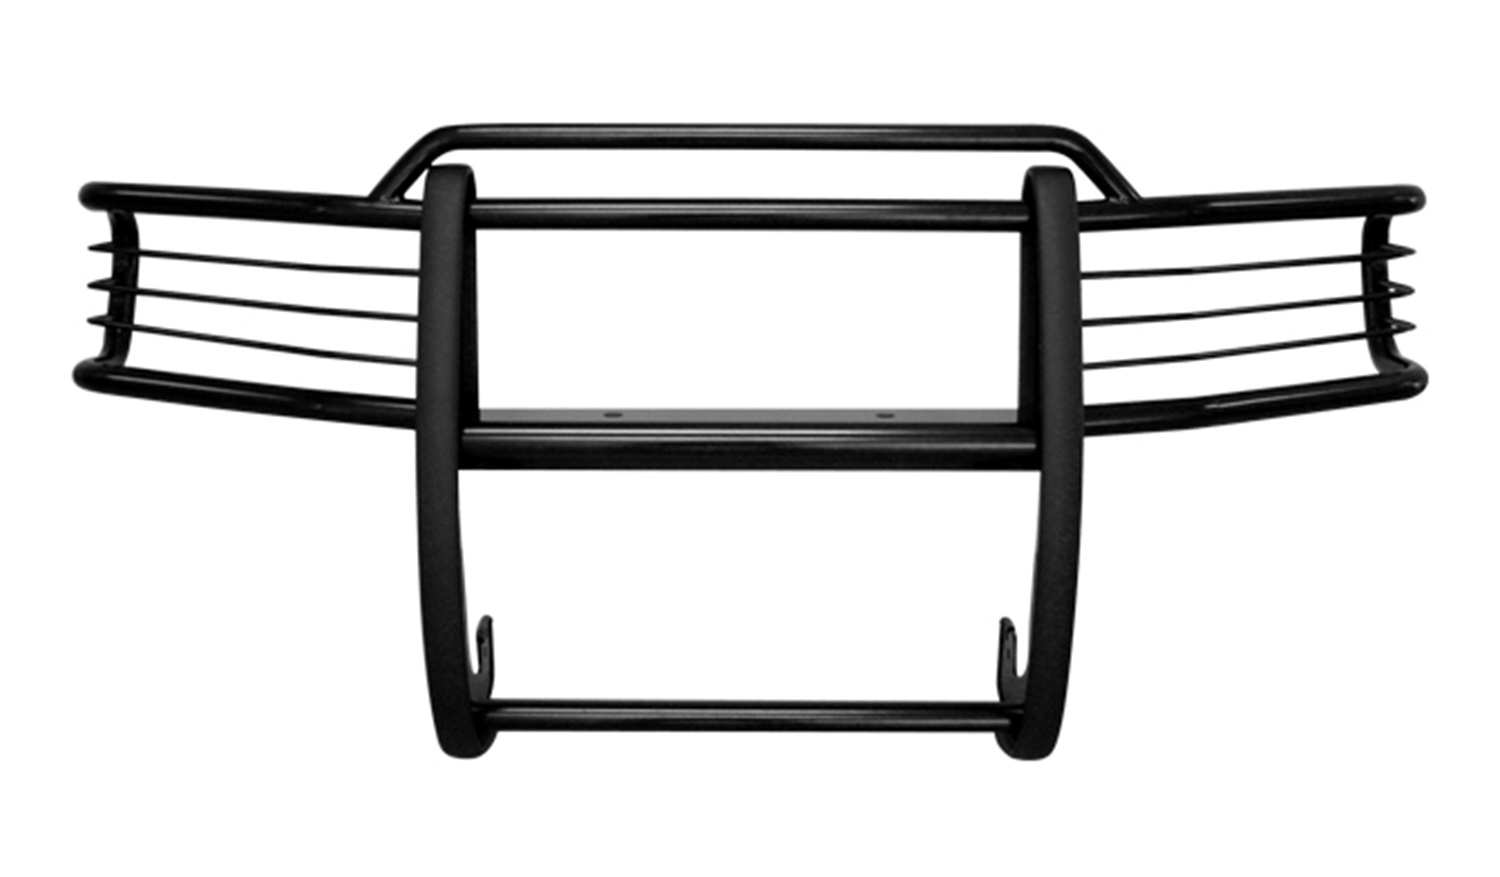 Aries Offroad Aries Offroad 2042 The Aries Bar; Grille/Brush Guard Fits 96-00 4Runner Tacoma